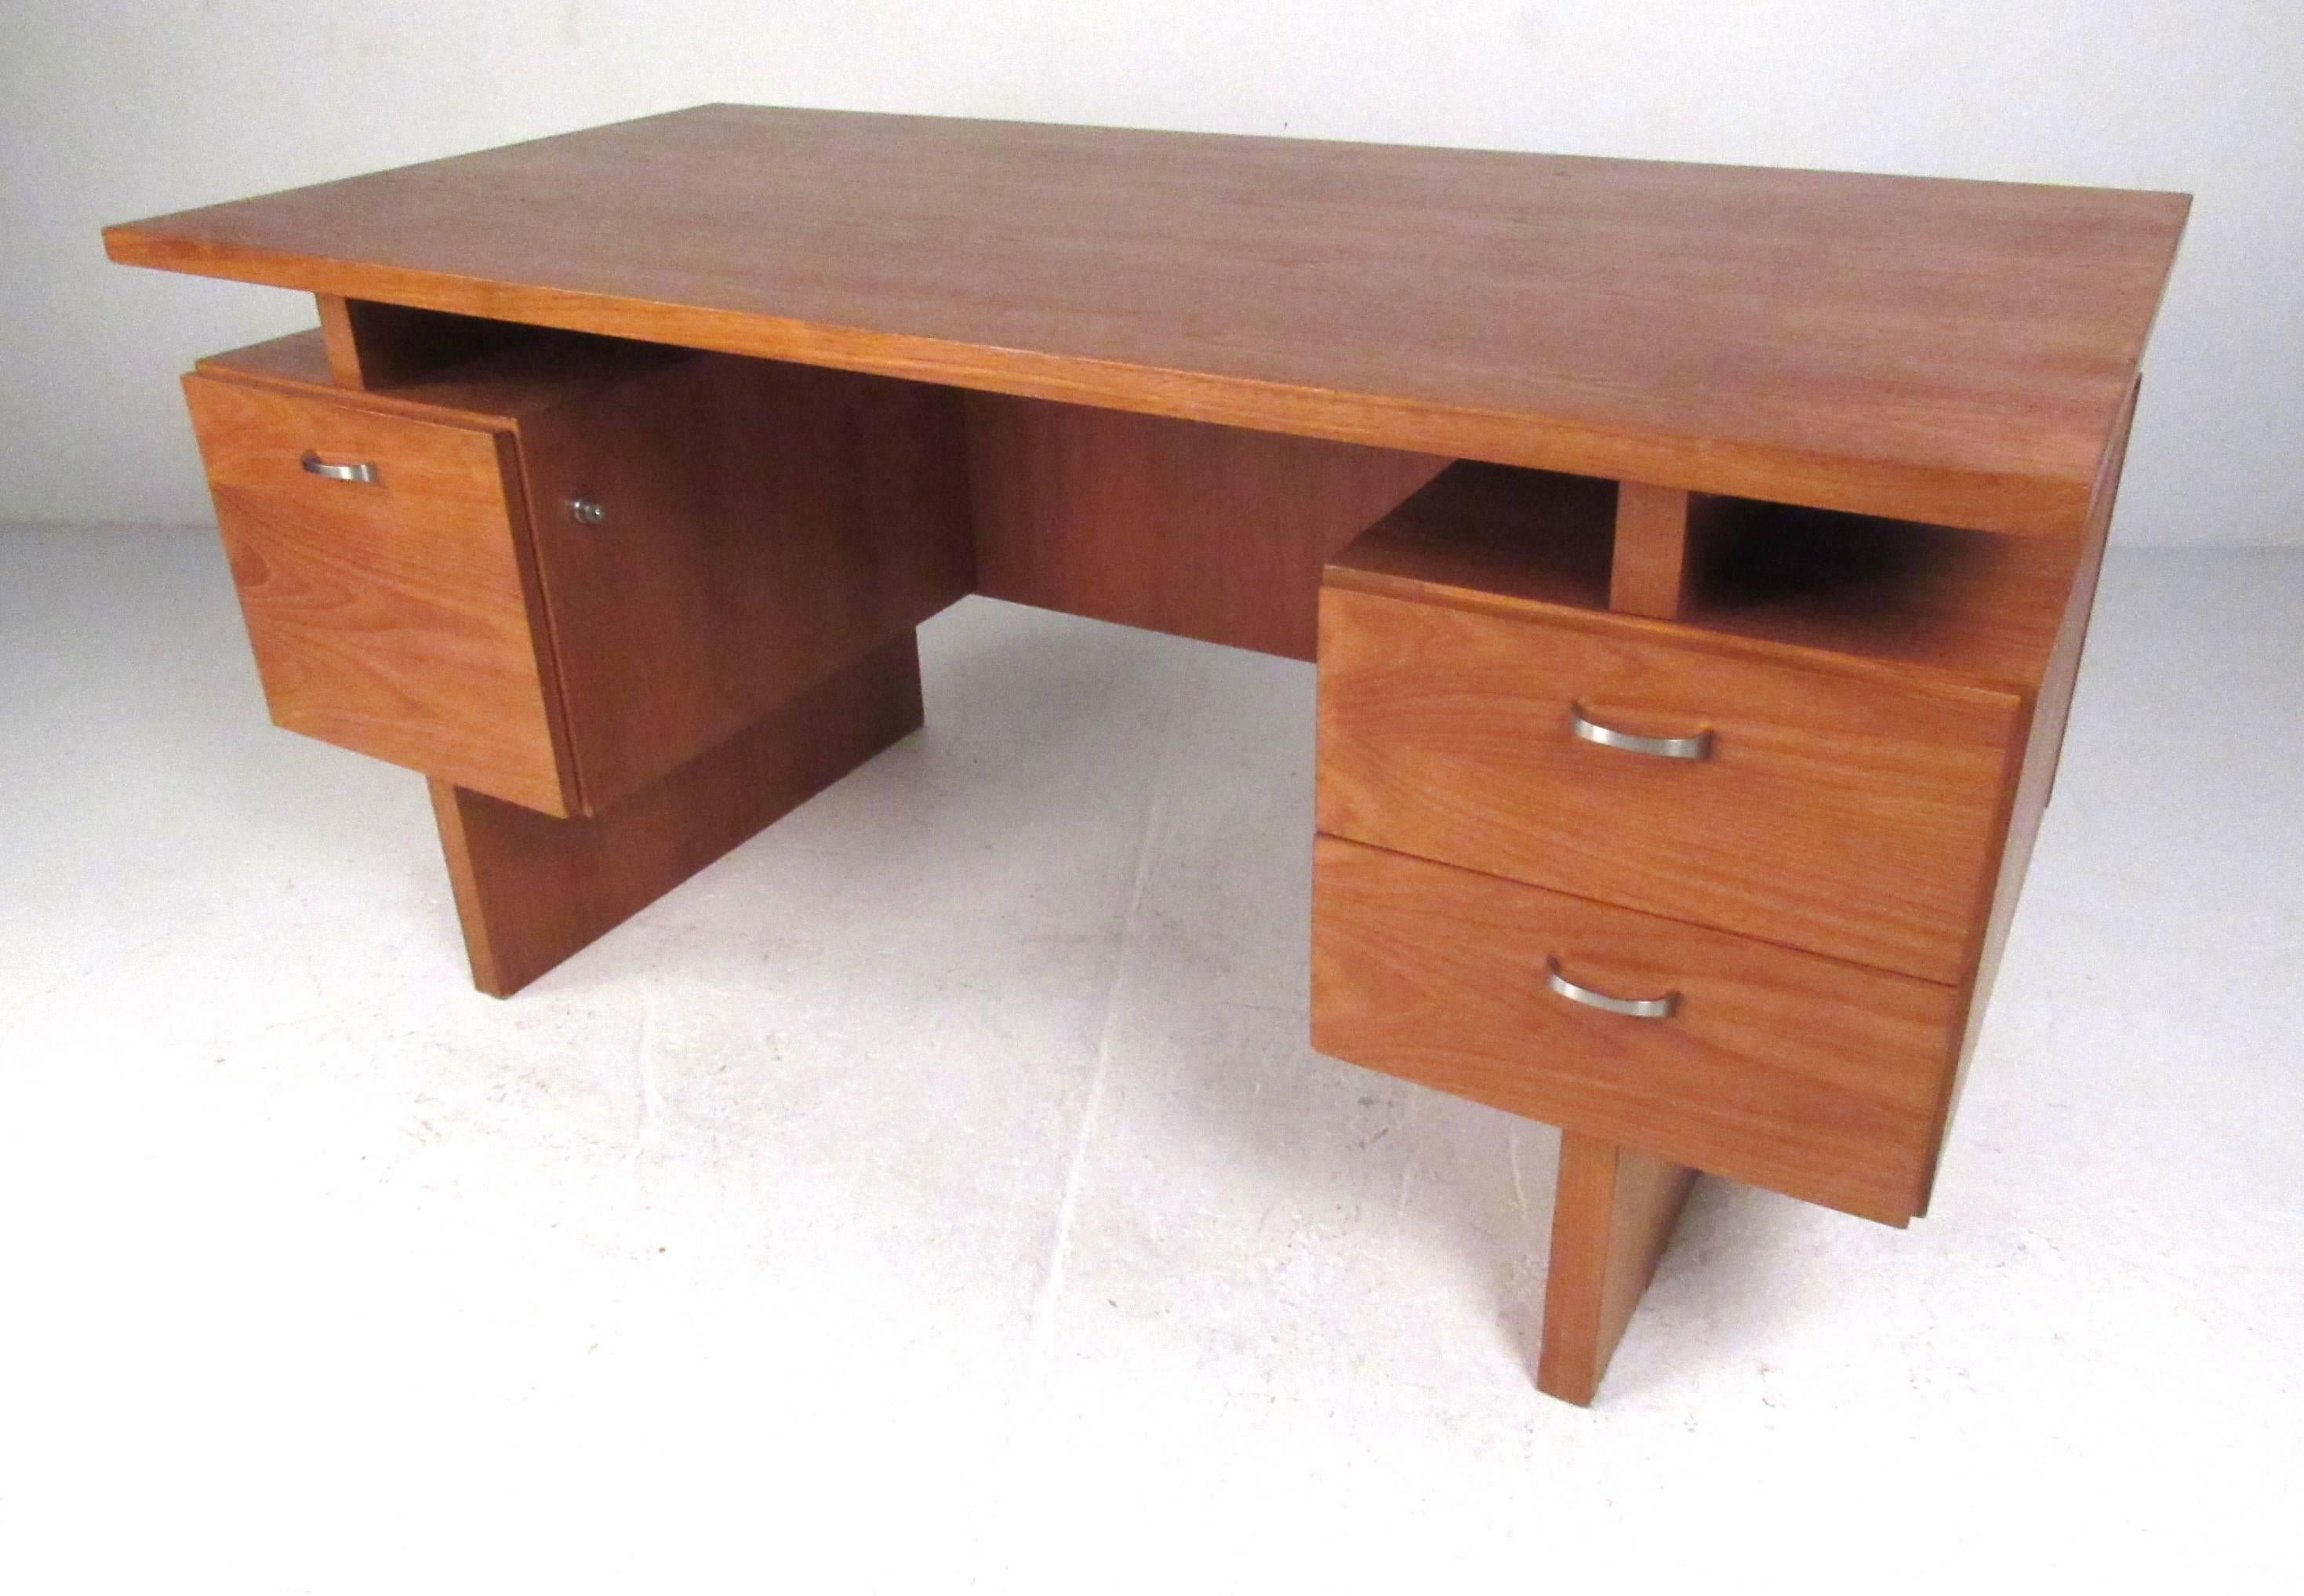 Sculptural floating top double pedestal desk by RS Associates of Montreal. Well constructed with three storage drawers, stainless pulls and finished back make this medium size desk a good fit for home or office. Please confirm item location (NY or